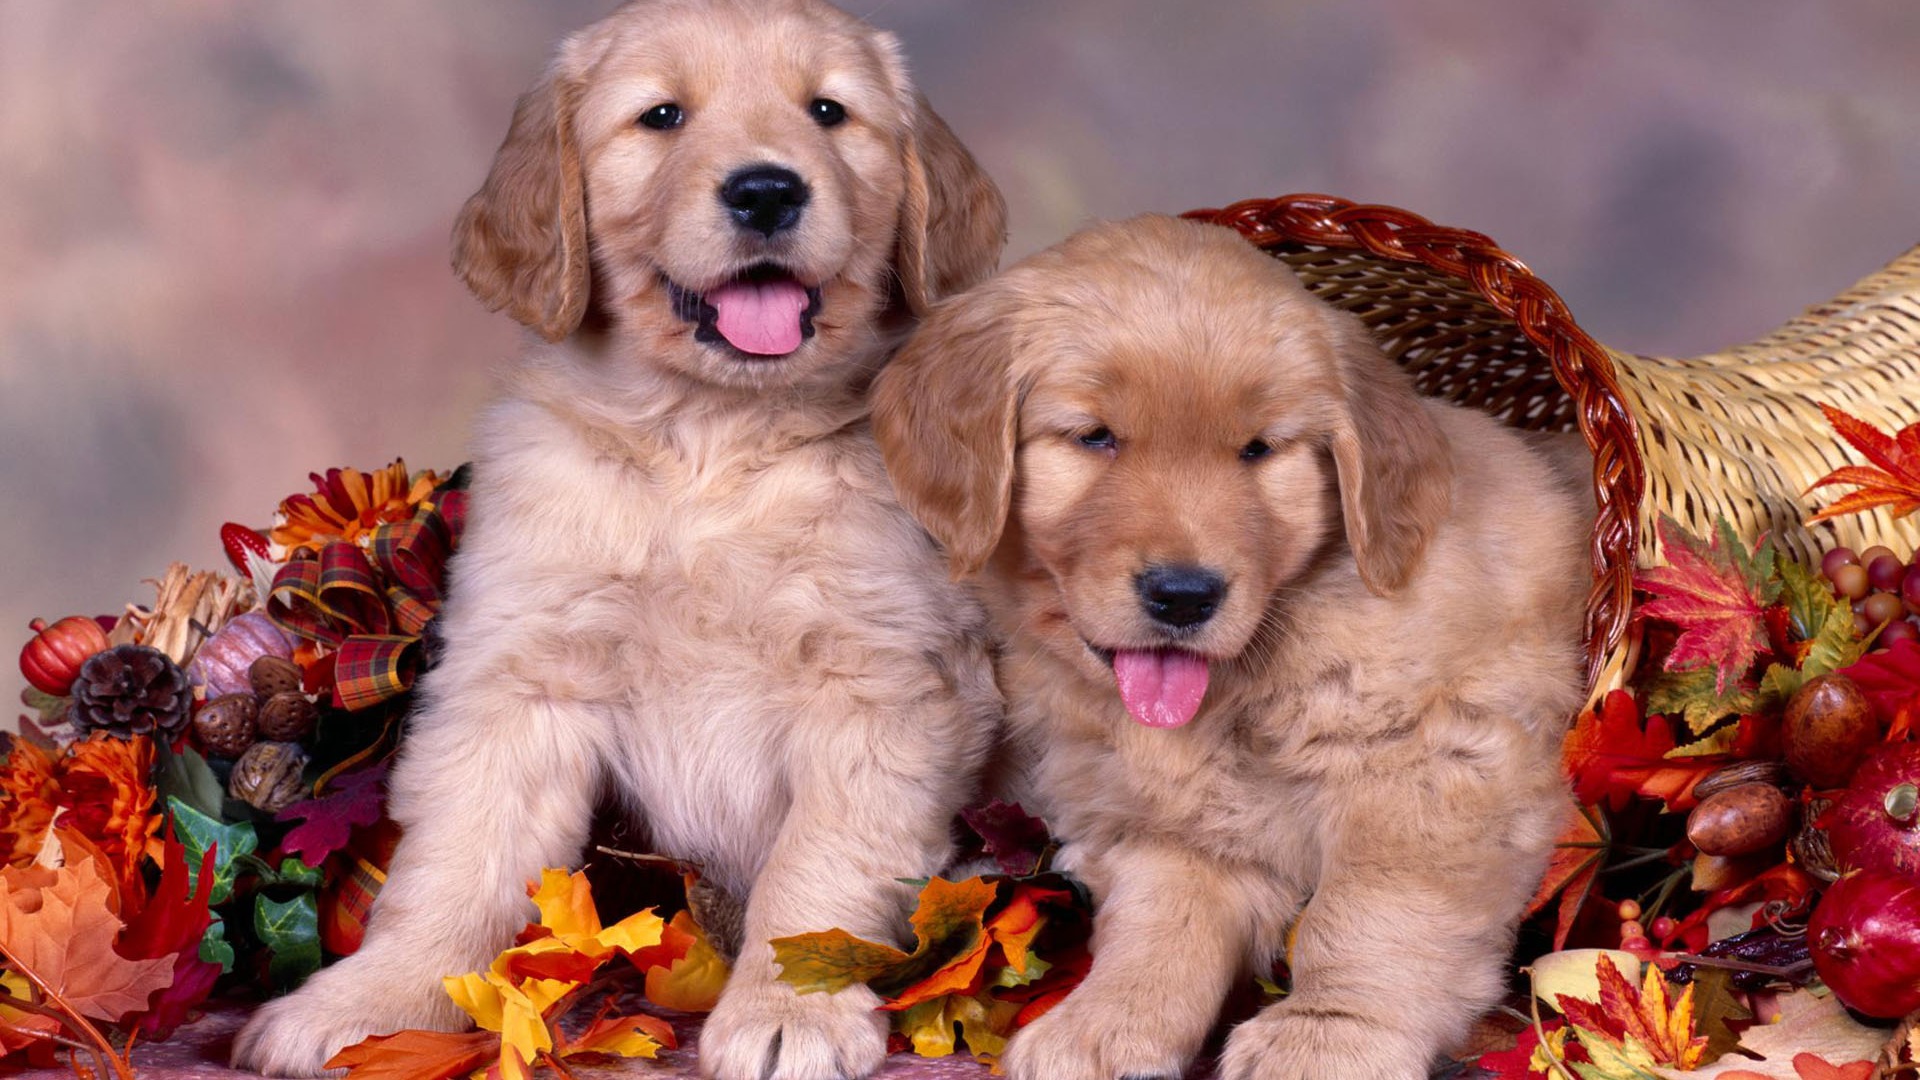 Puppy Photo HD wallpapers (2) #12 - 1920x1080